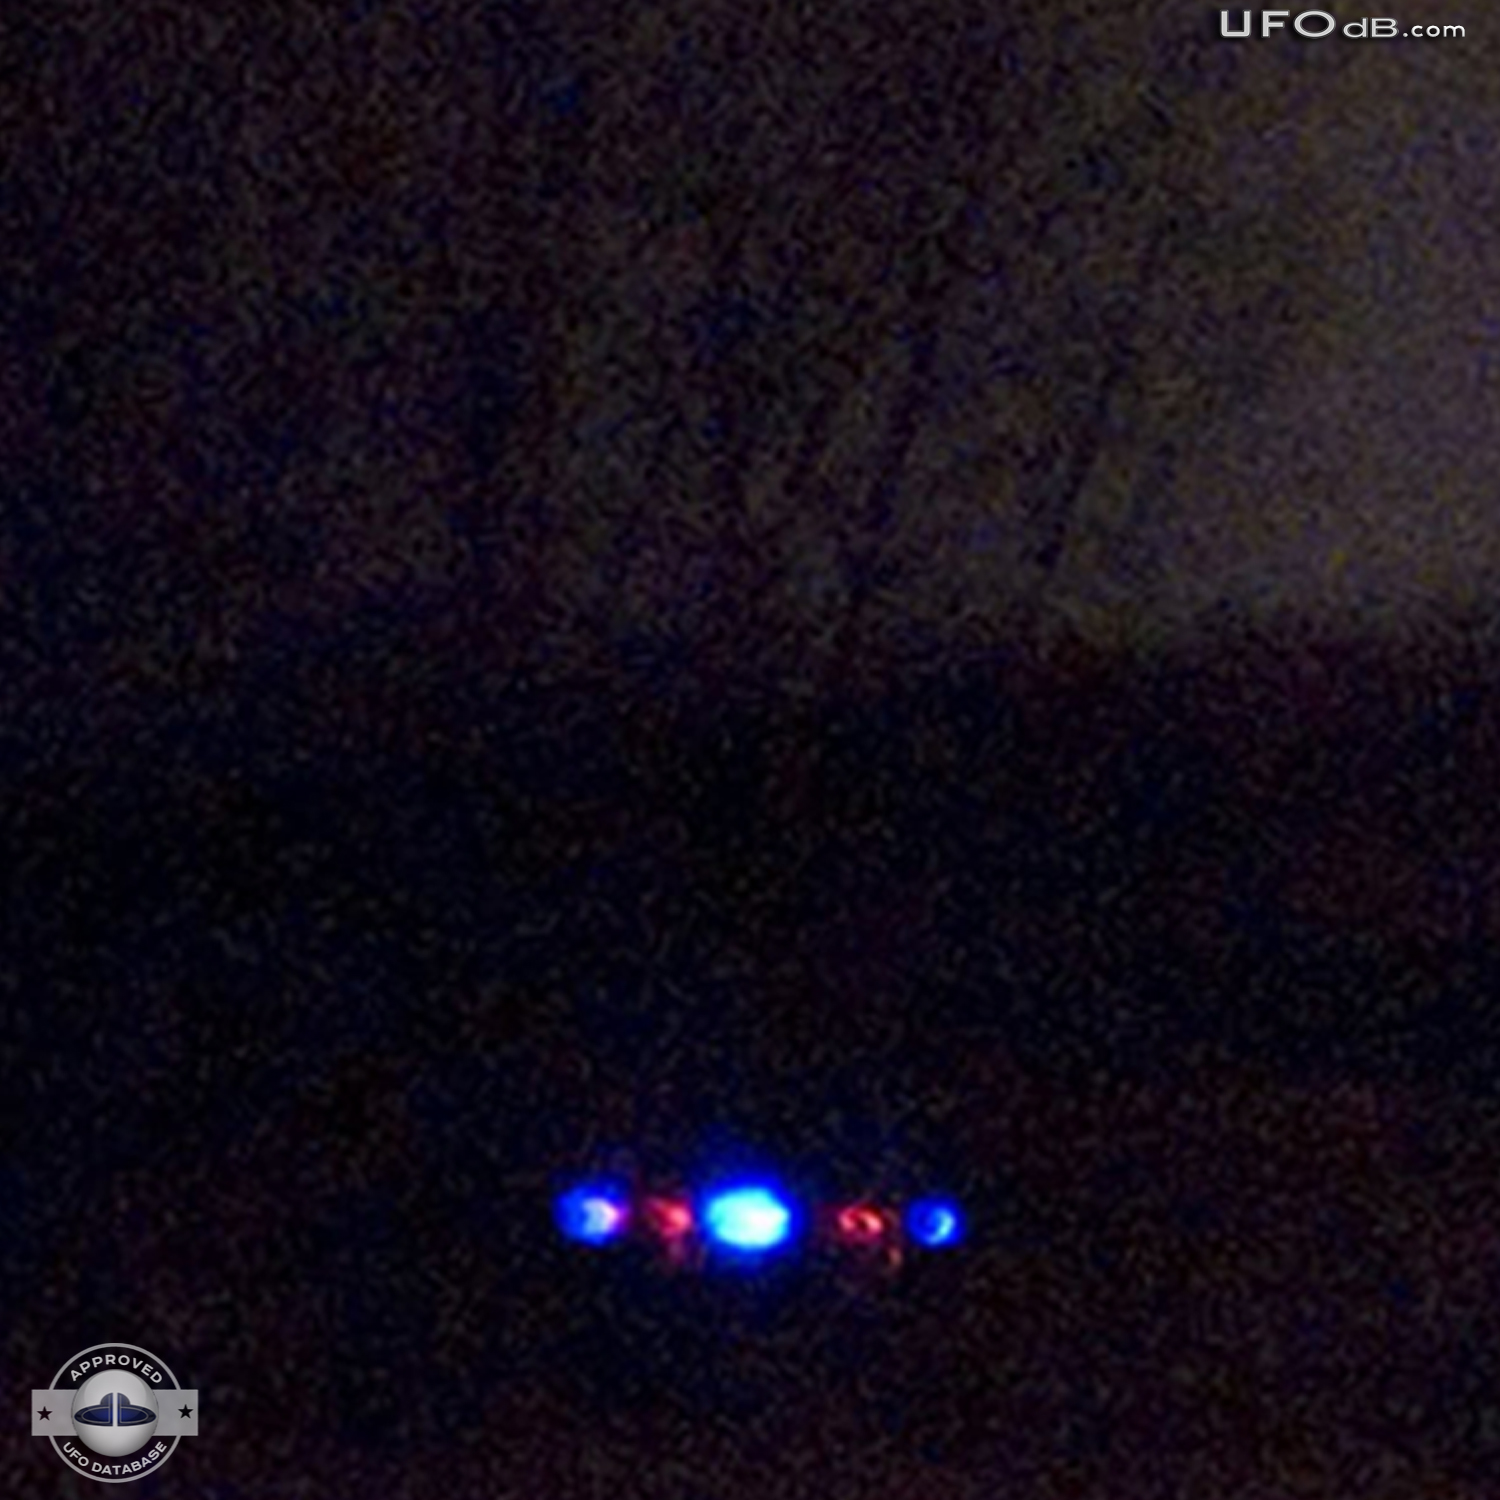 People from Manitoba witnesses a UFO landing on their fields June 2011 UFO Picture #355-4